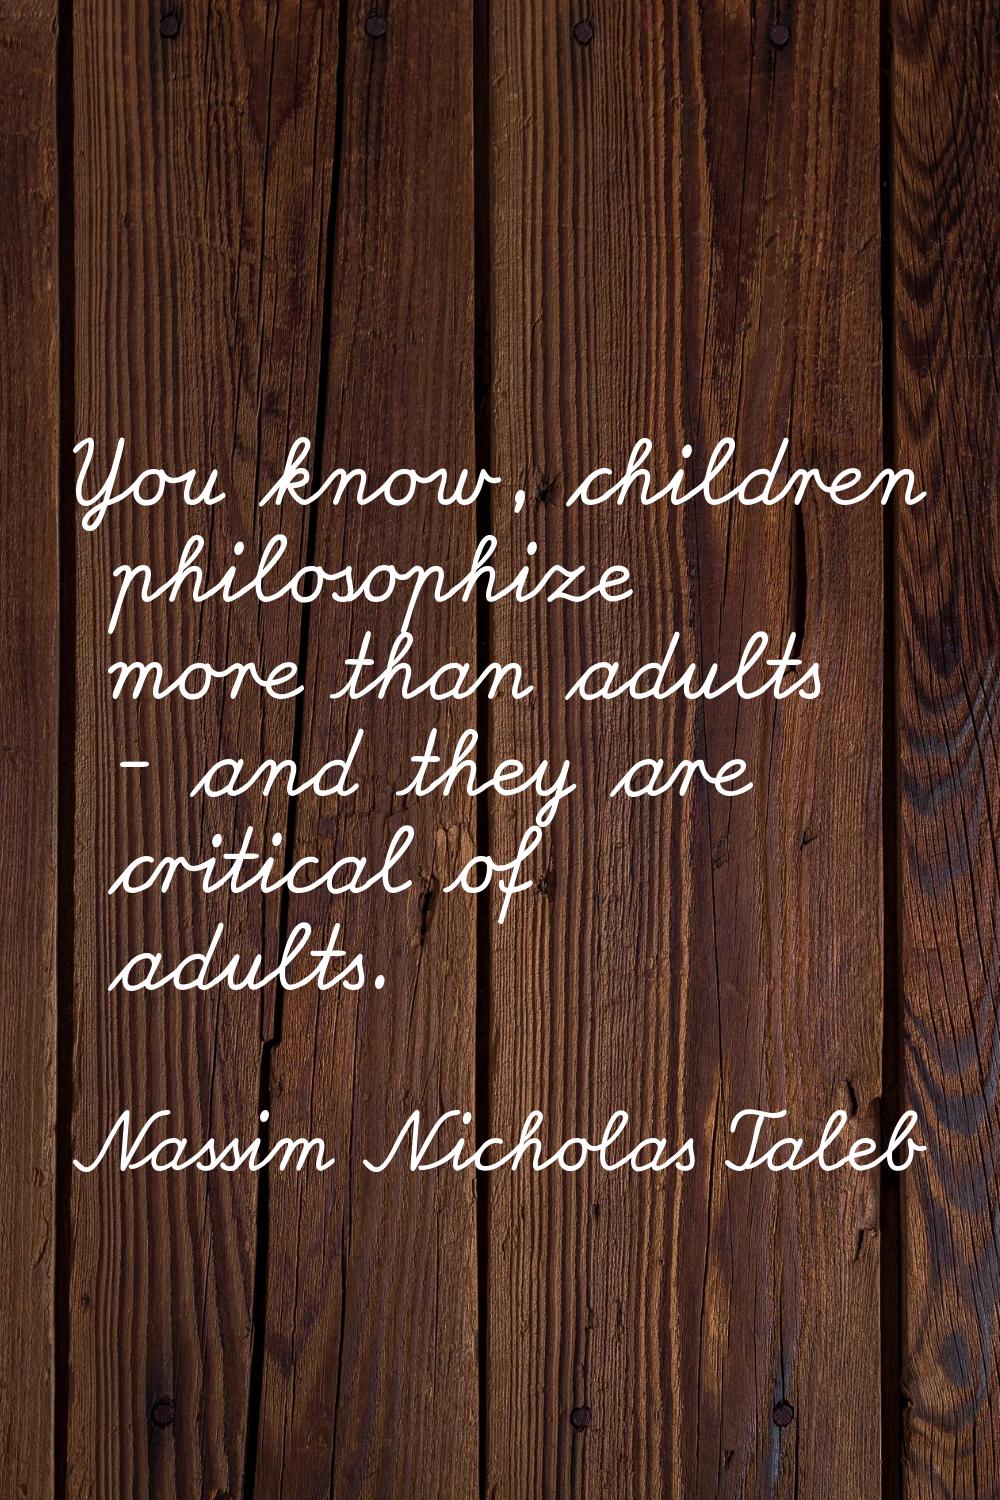 You know, children philosophize more than adults - and they are critical of adults.